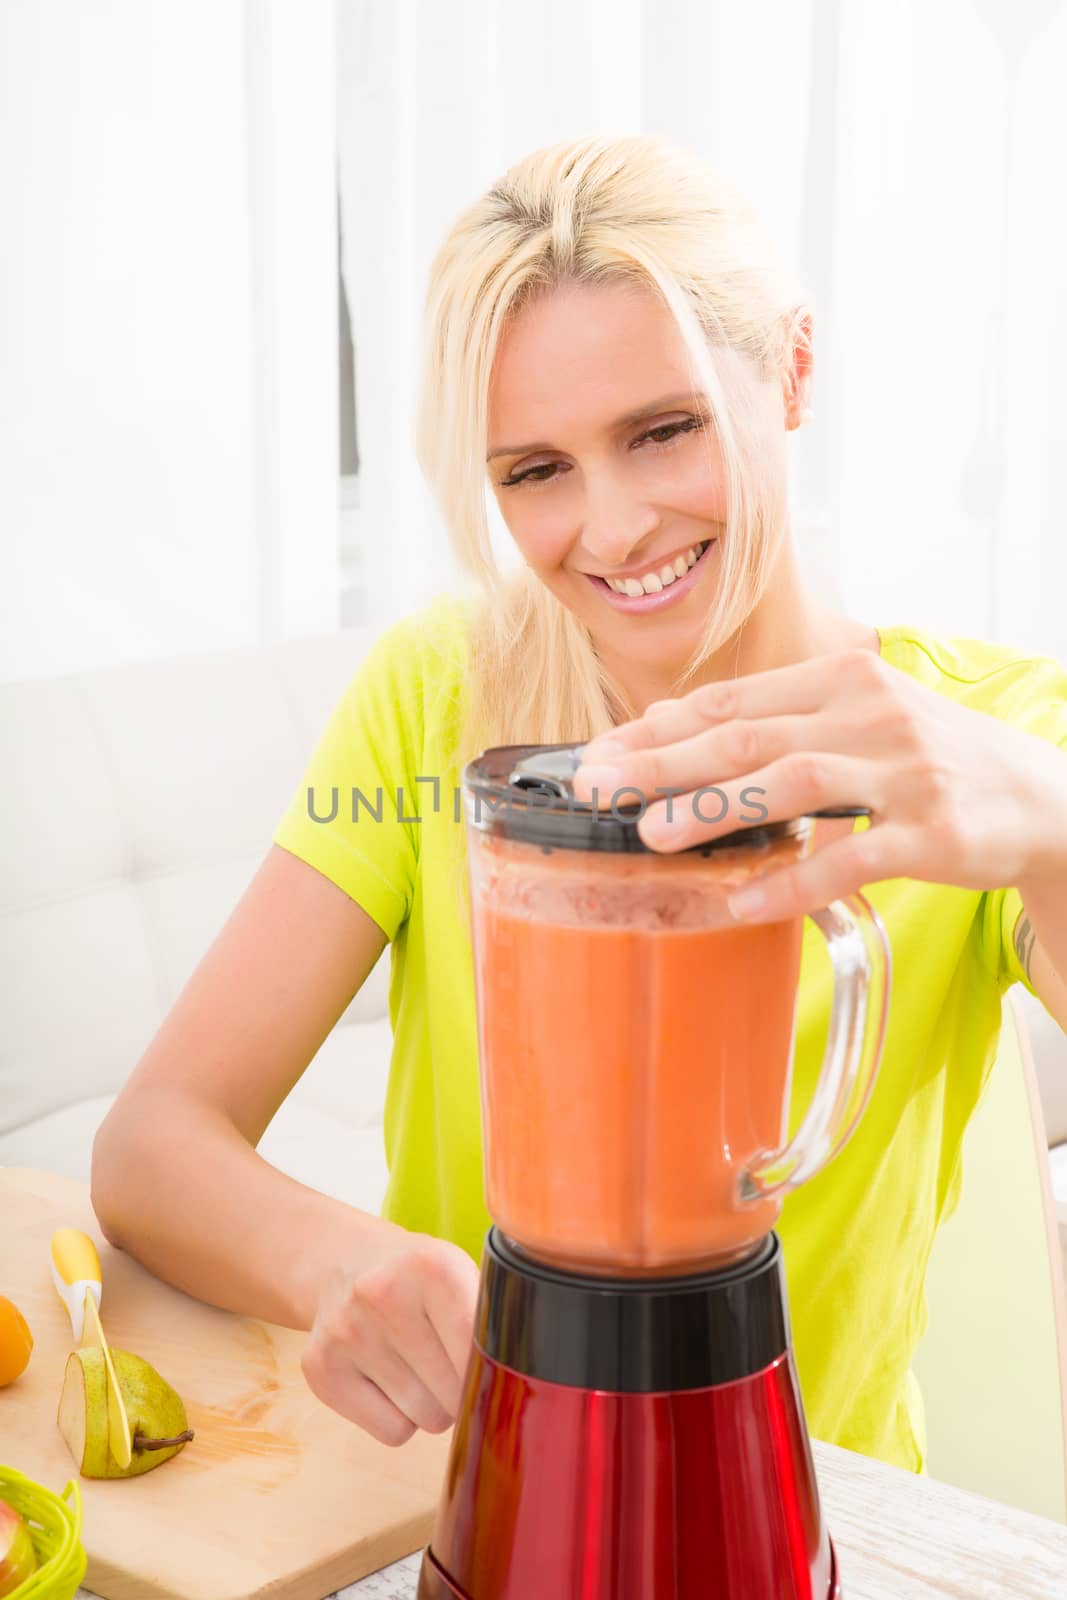 A beautiful mature woman preparing a smoothie or juice with fruits in the kitchen.
